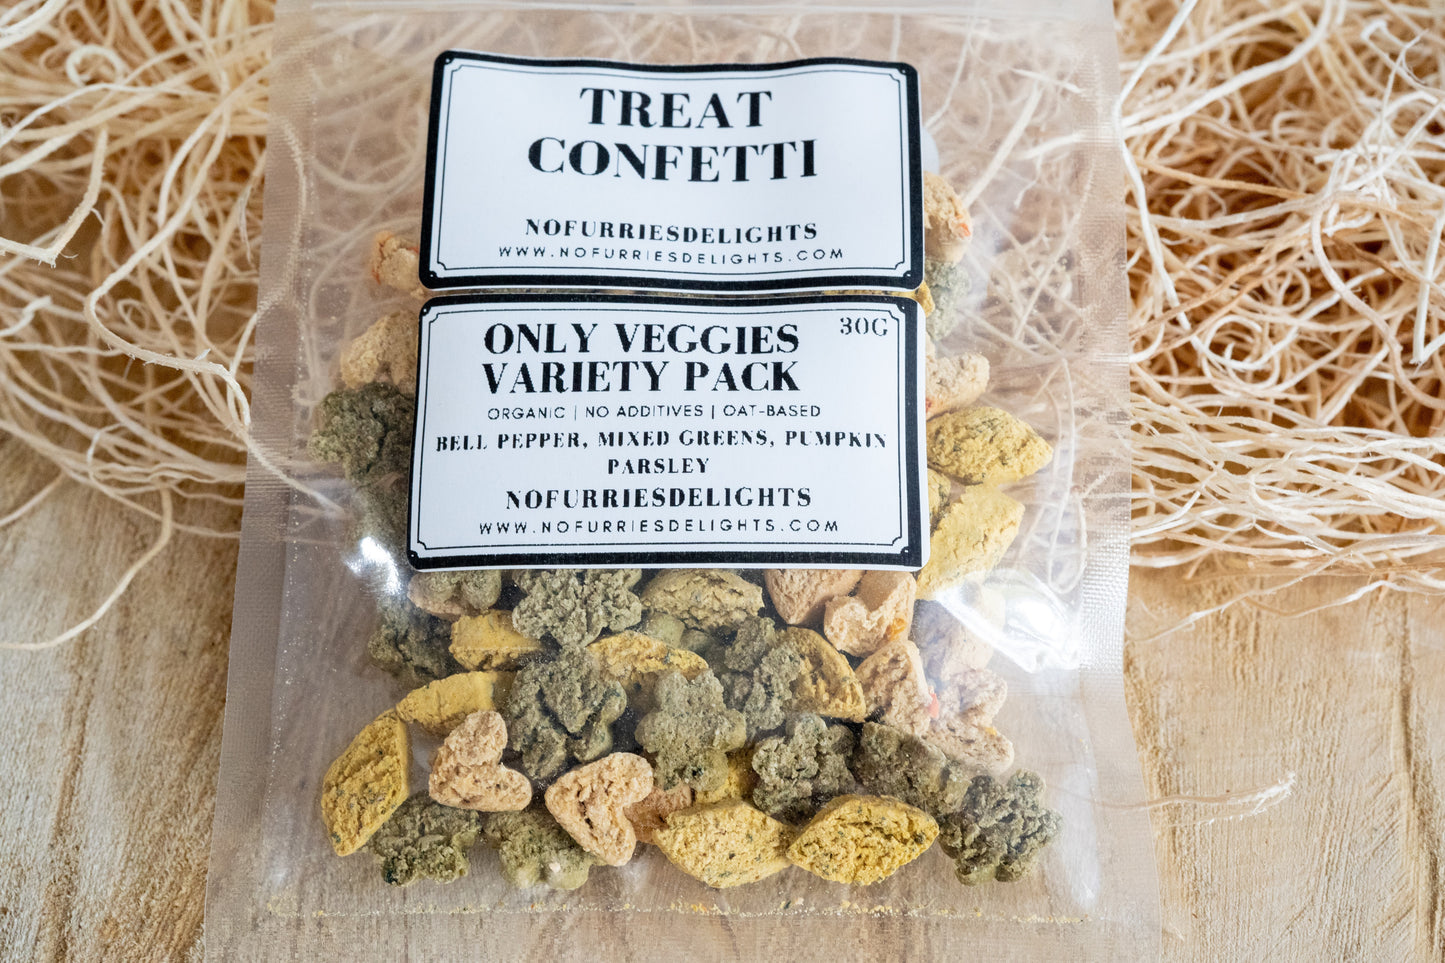 Mix of veggies bites for small pets and birds in the following flavours: bell pepper, mixed greens, pumkin parsley.